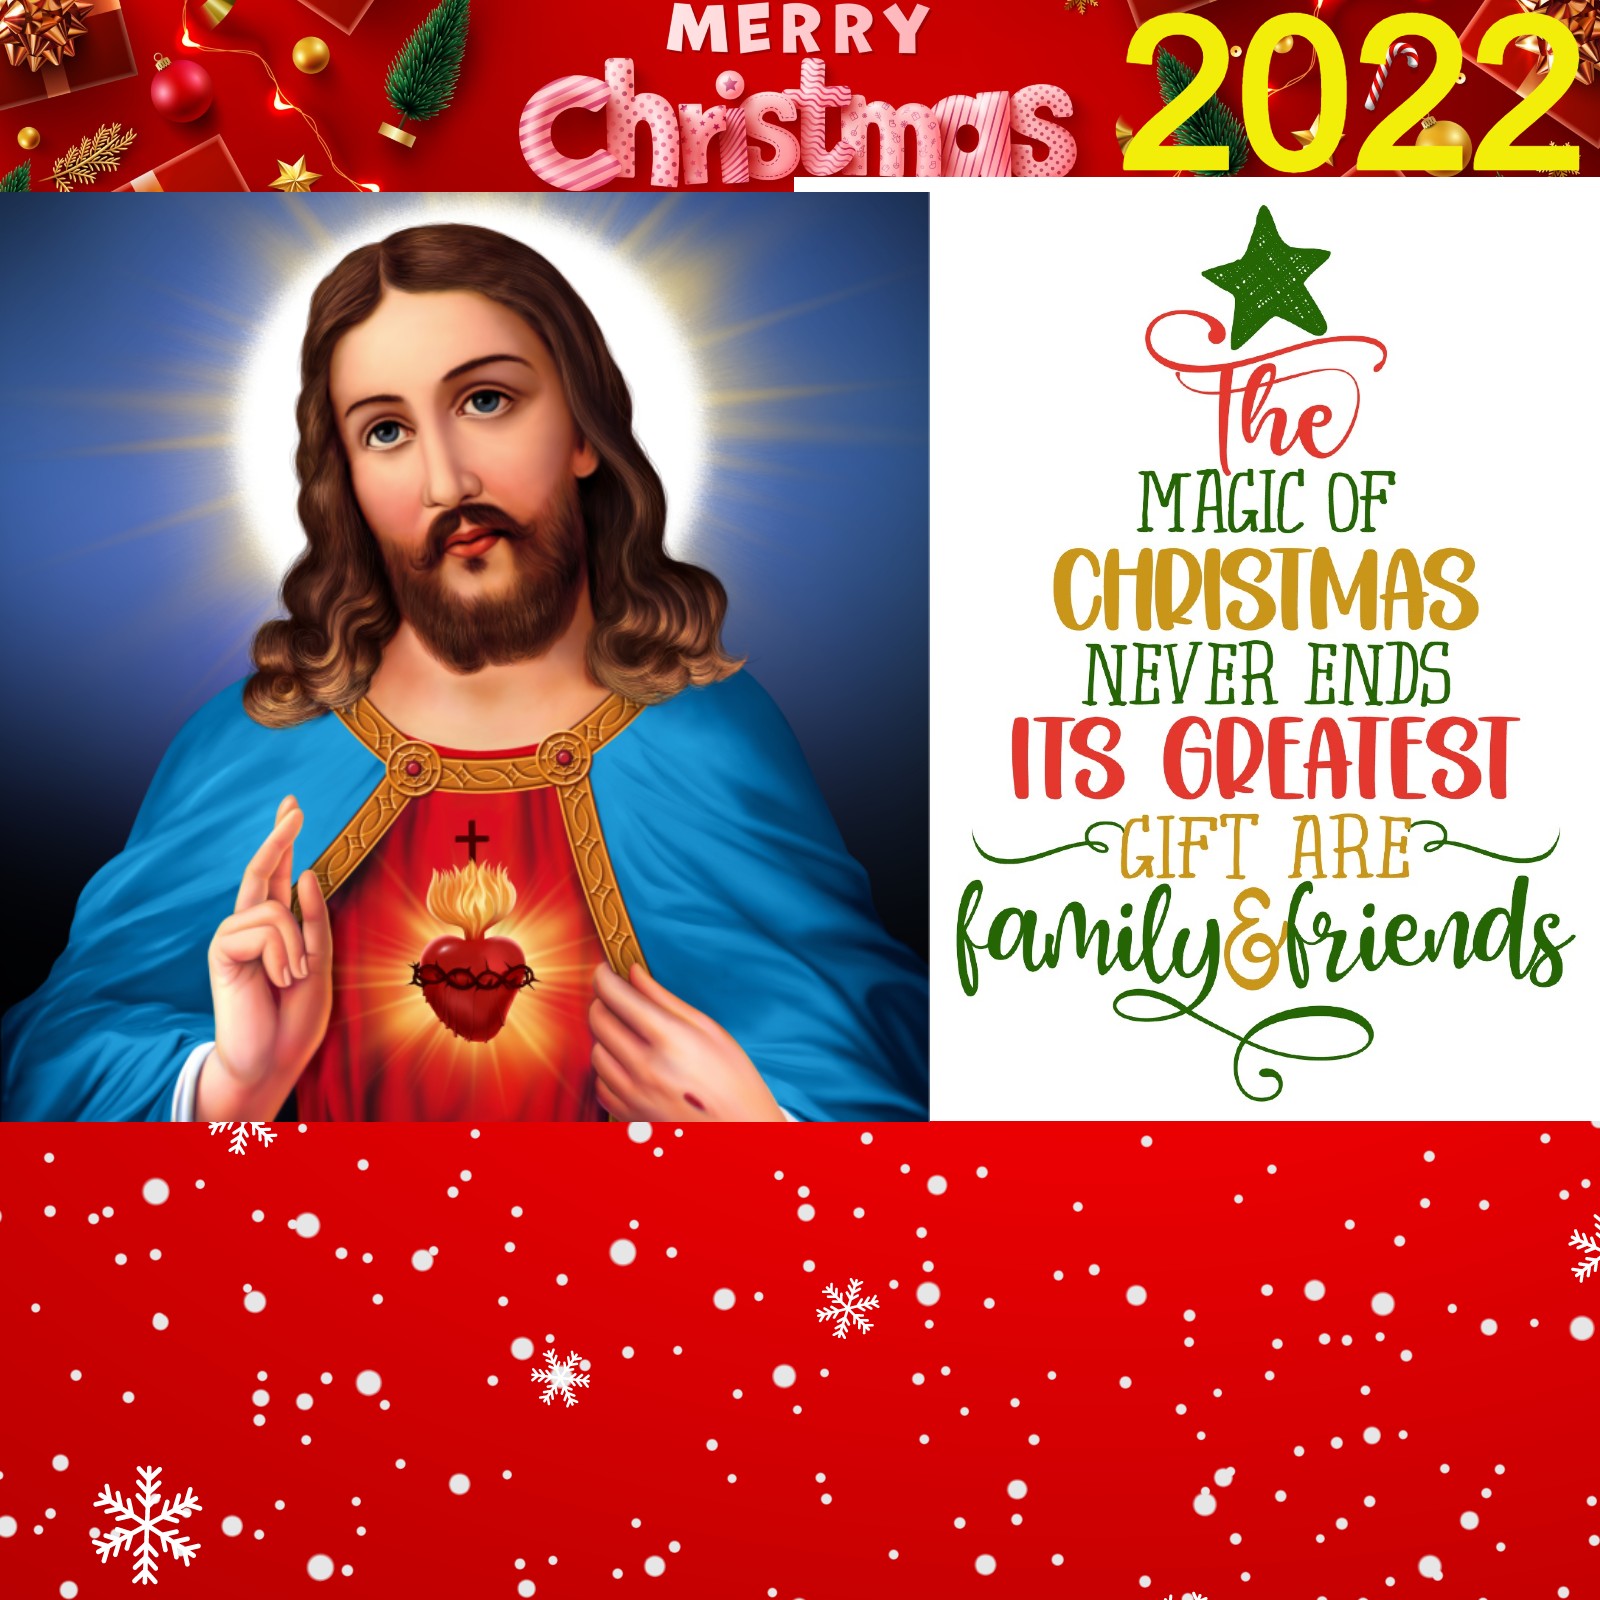 2022 christmas images